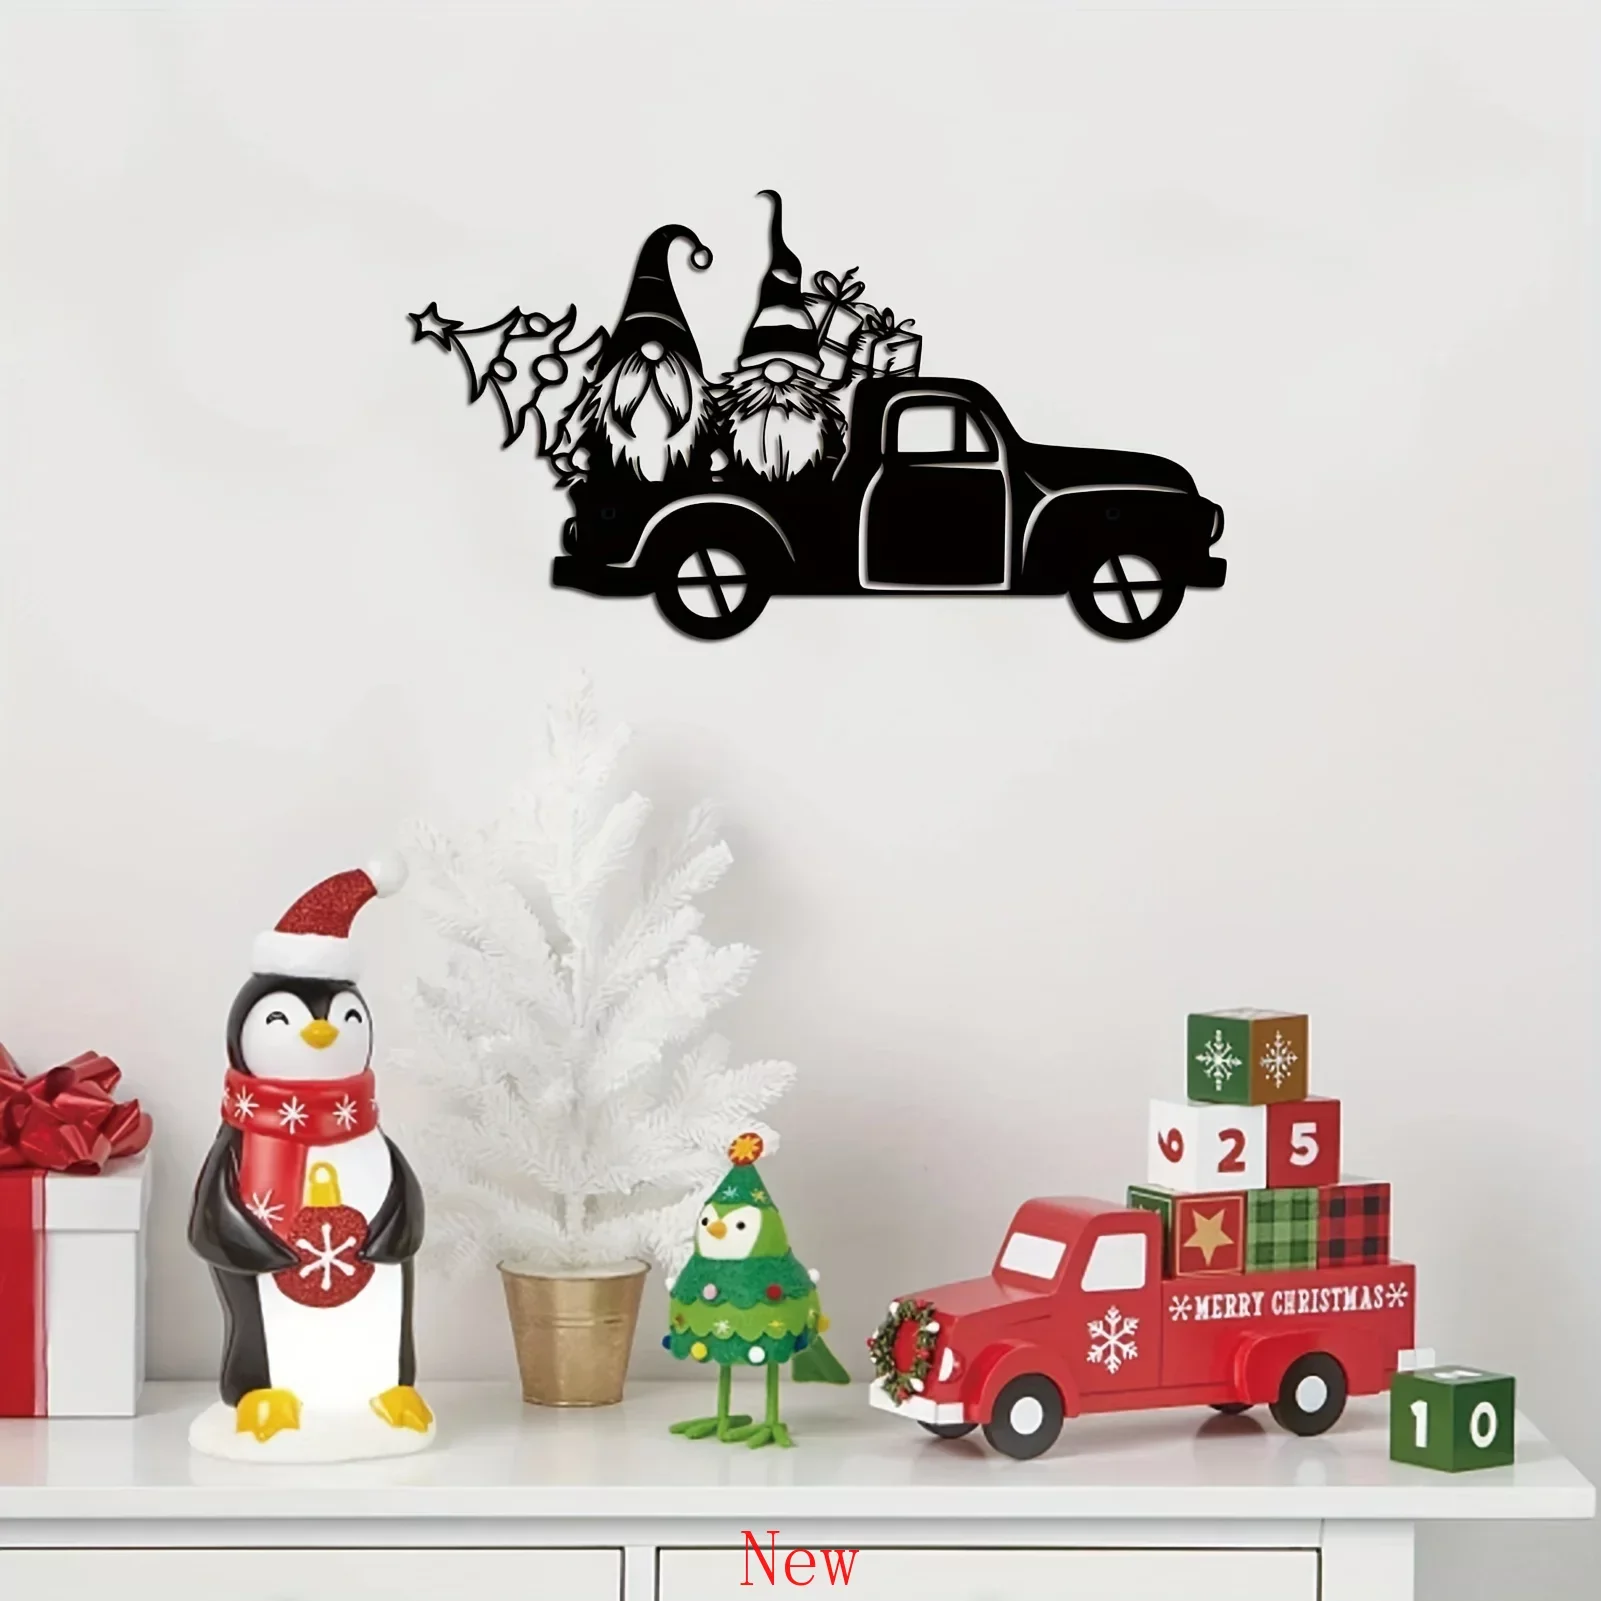 

Promotion Santa Claus Pickup Truck Metal Wall Mounted Art Decoration Christmas Theme Art Decor Wall Hanging Bedroom Living Room